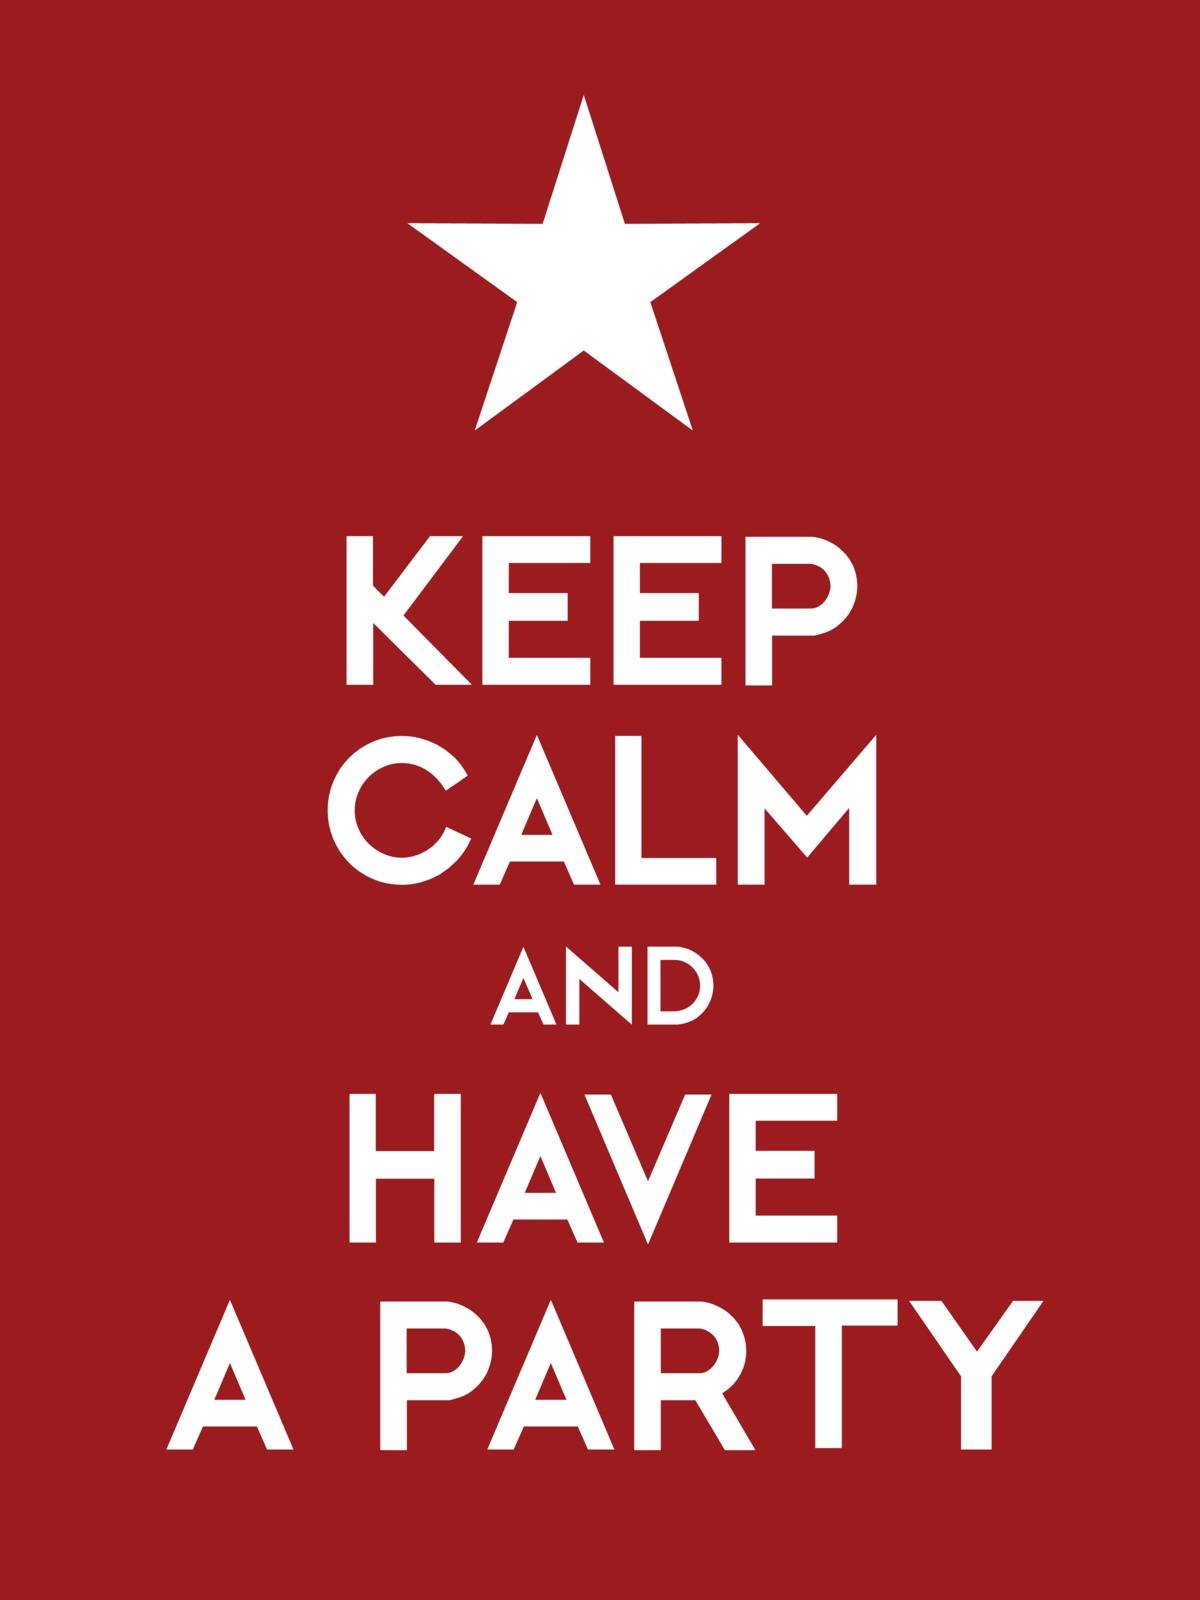 Keep calm and have a party poster. White letters on red.